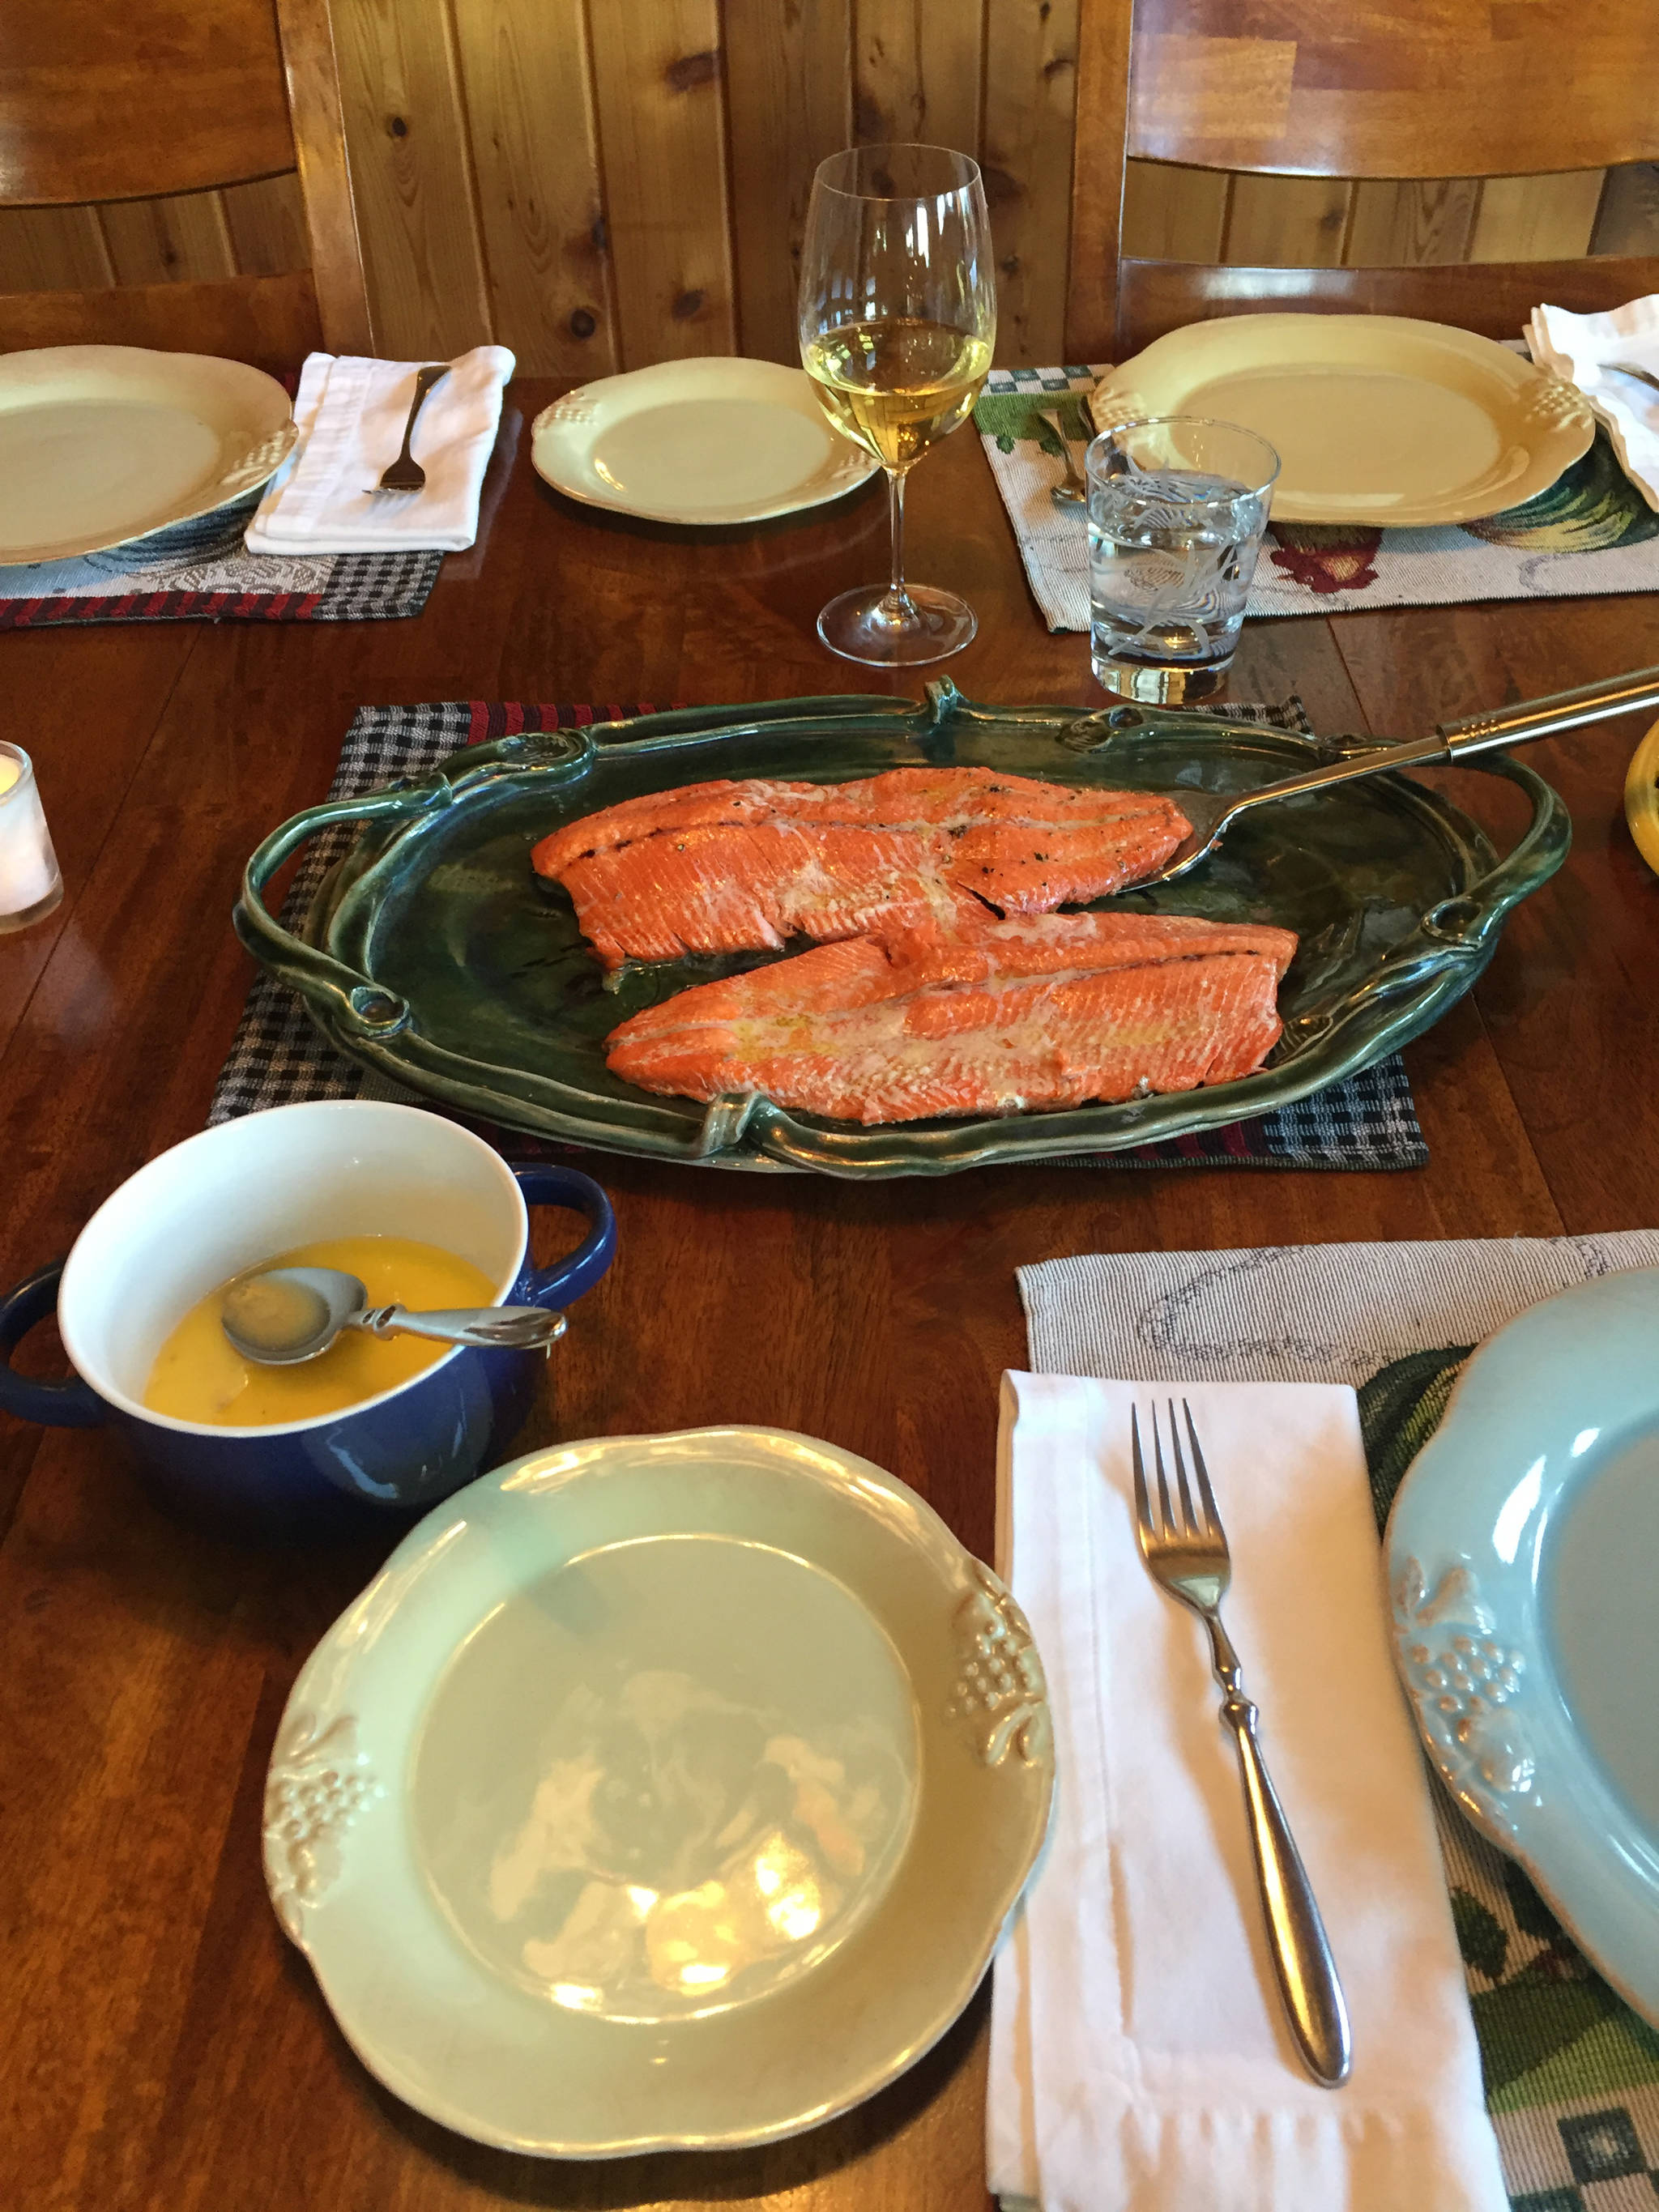 Fresh salmon hot off the grill is the centerpiece of an Alaska summer meal. (Photo by Teri Robl)